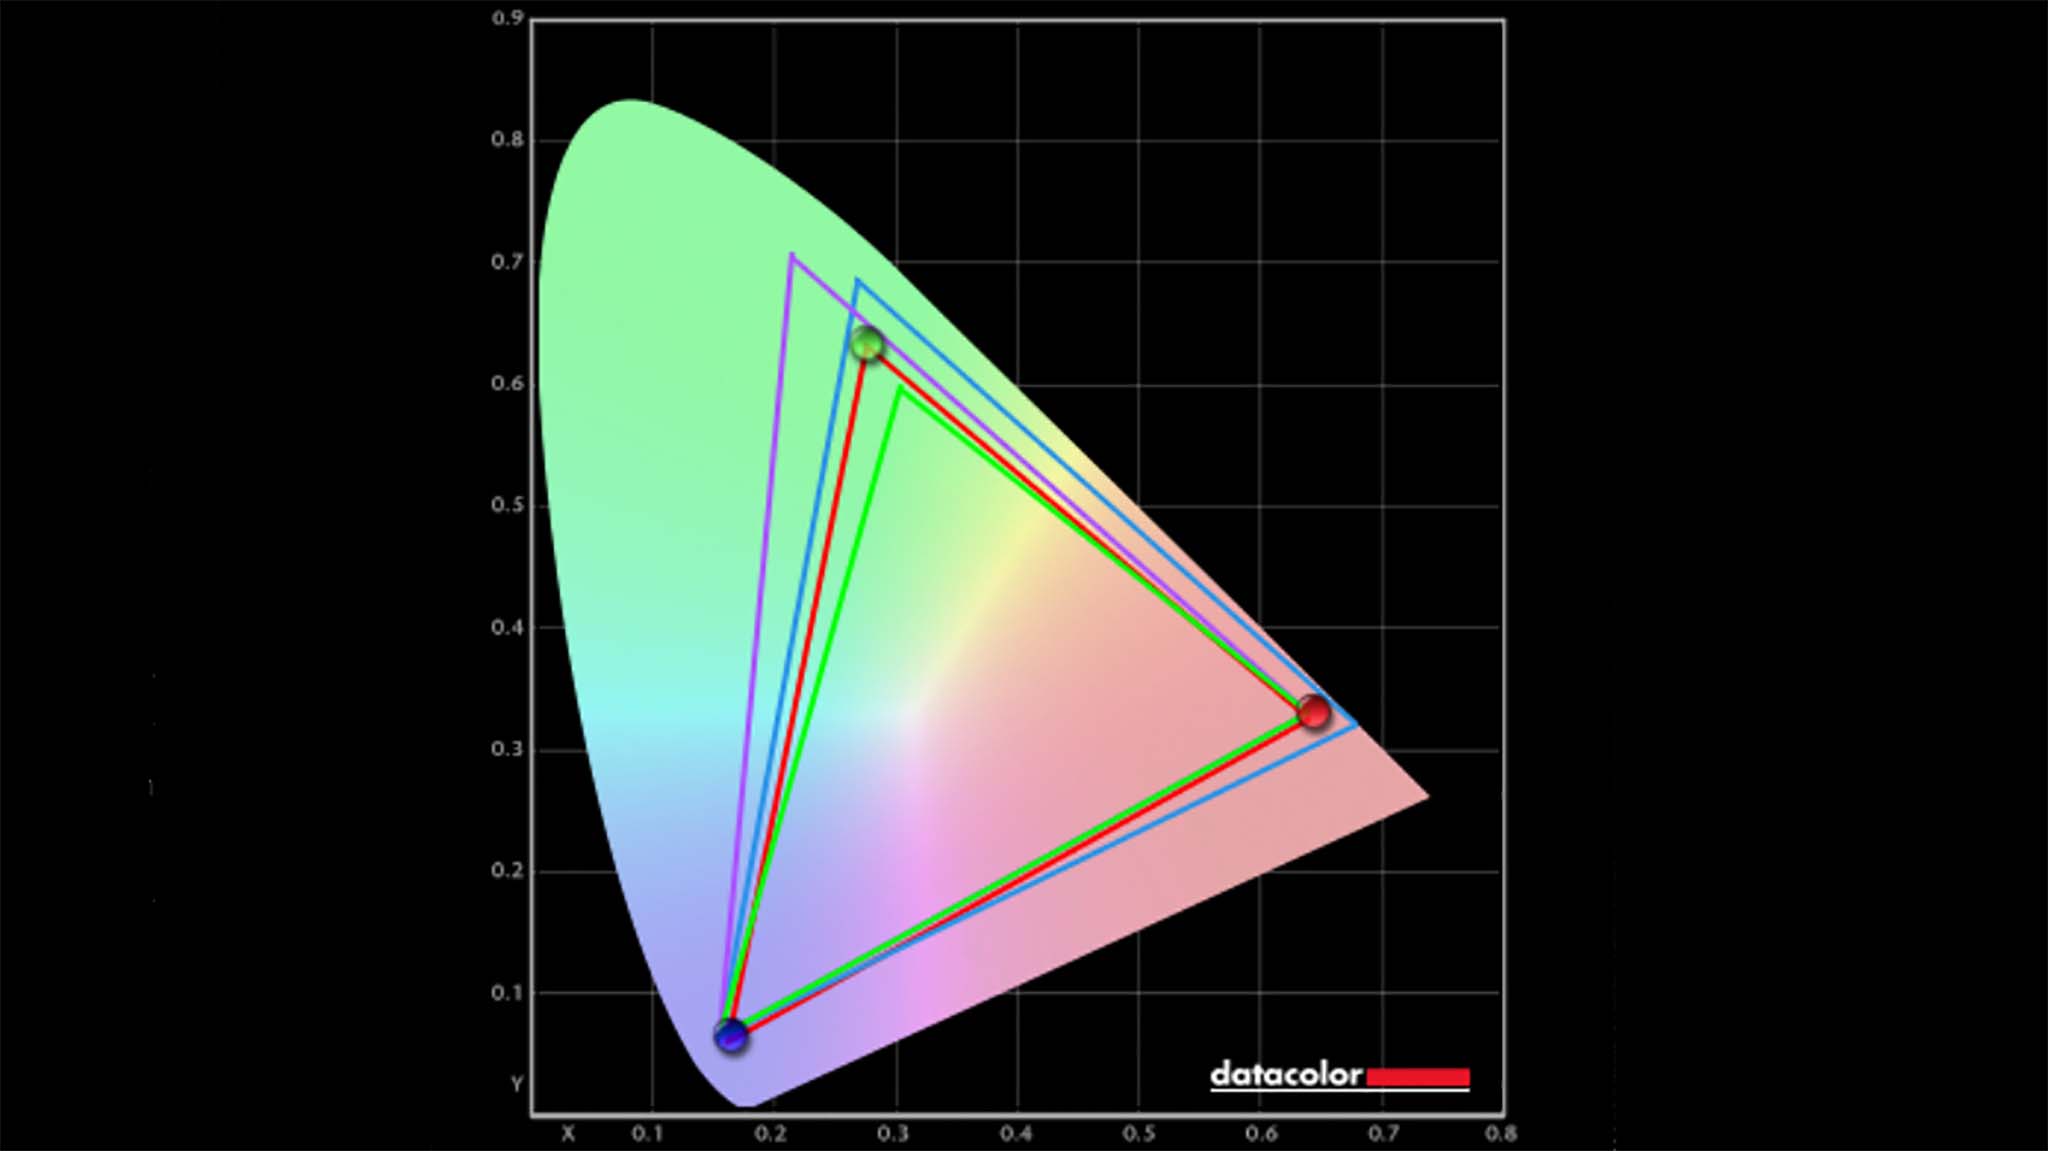 In a color gamut test, the AYANEO Flip DS produced 99% of sRGB, 80% of AdobeRGB, and 82% of P3.